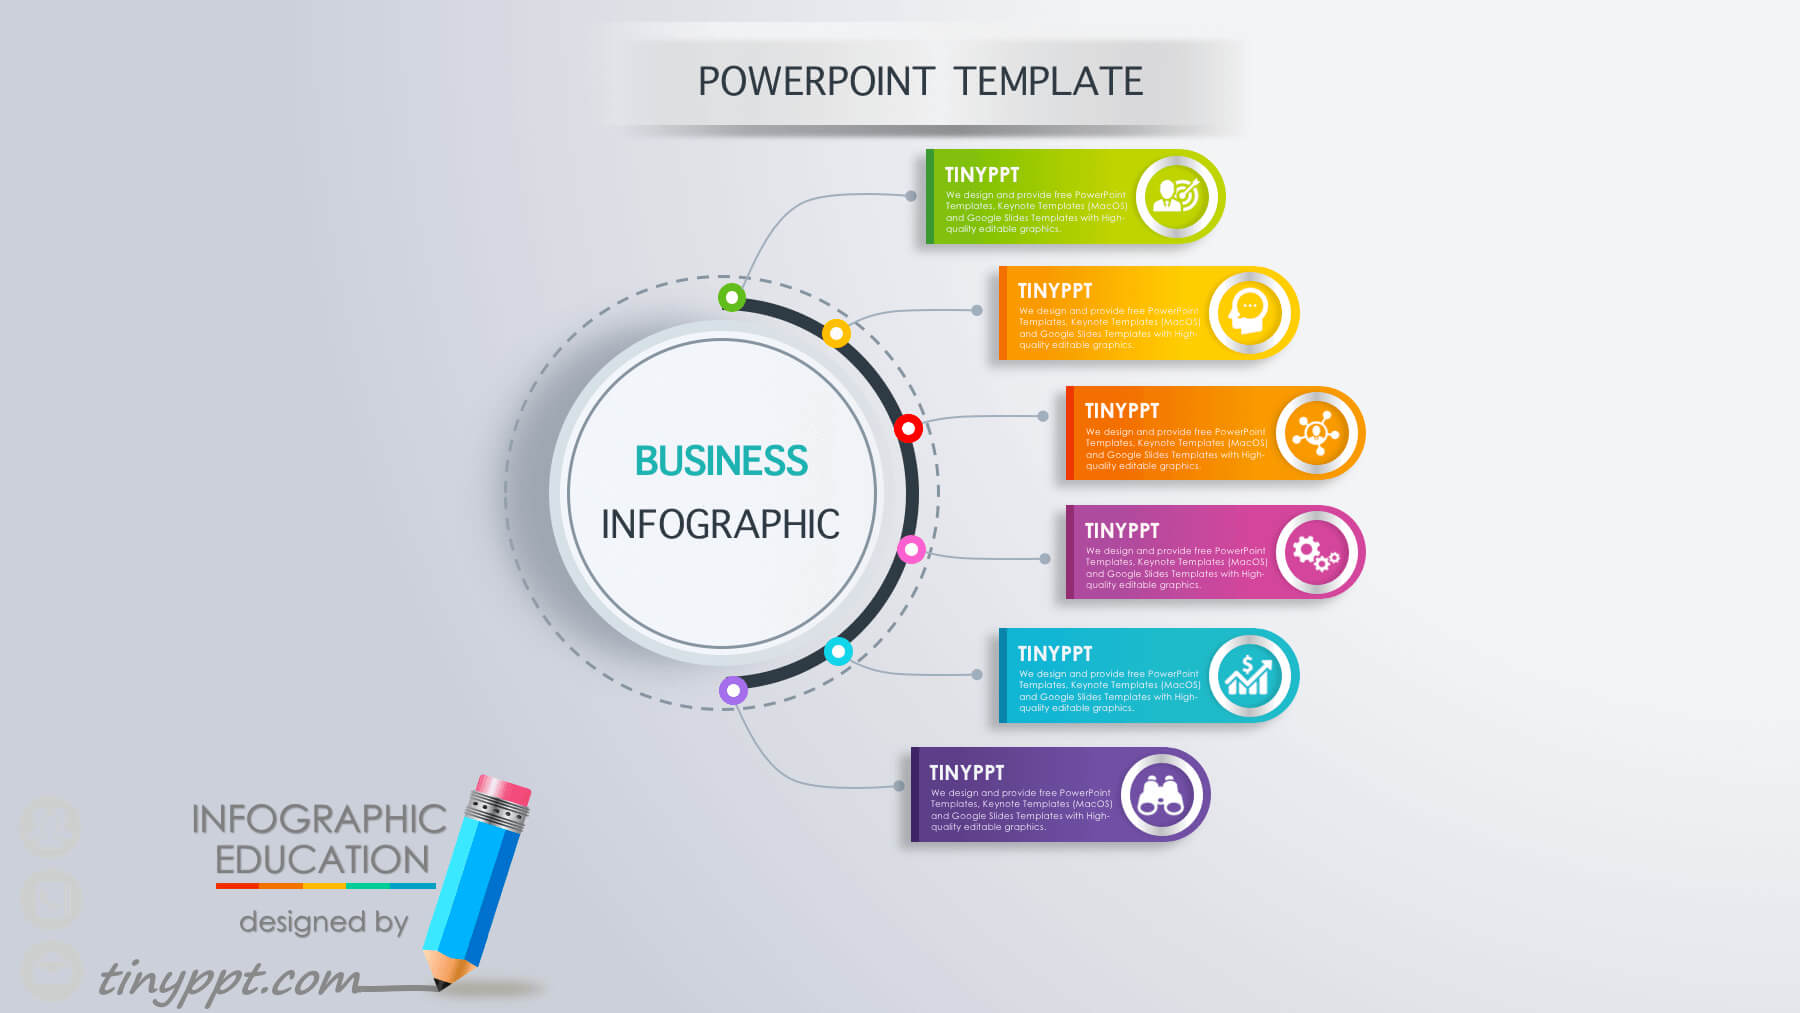 Timeline In Powerpoint Template | Powerpoint Ideas & Formats Intended For Post Mortem Template Powerpoint